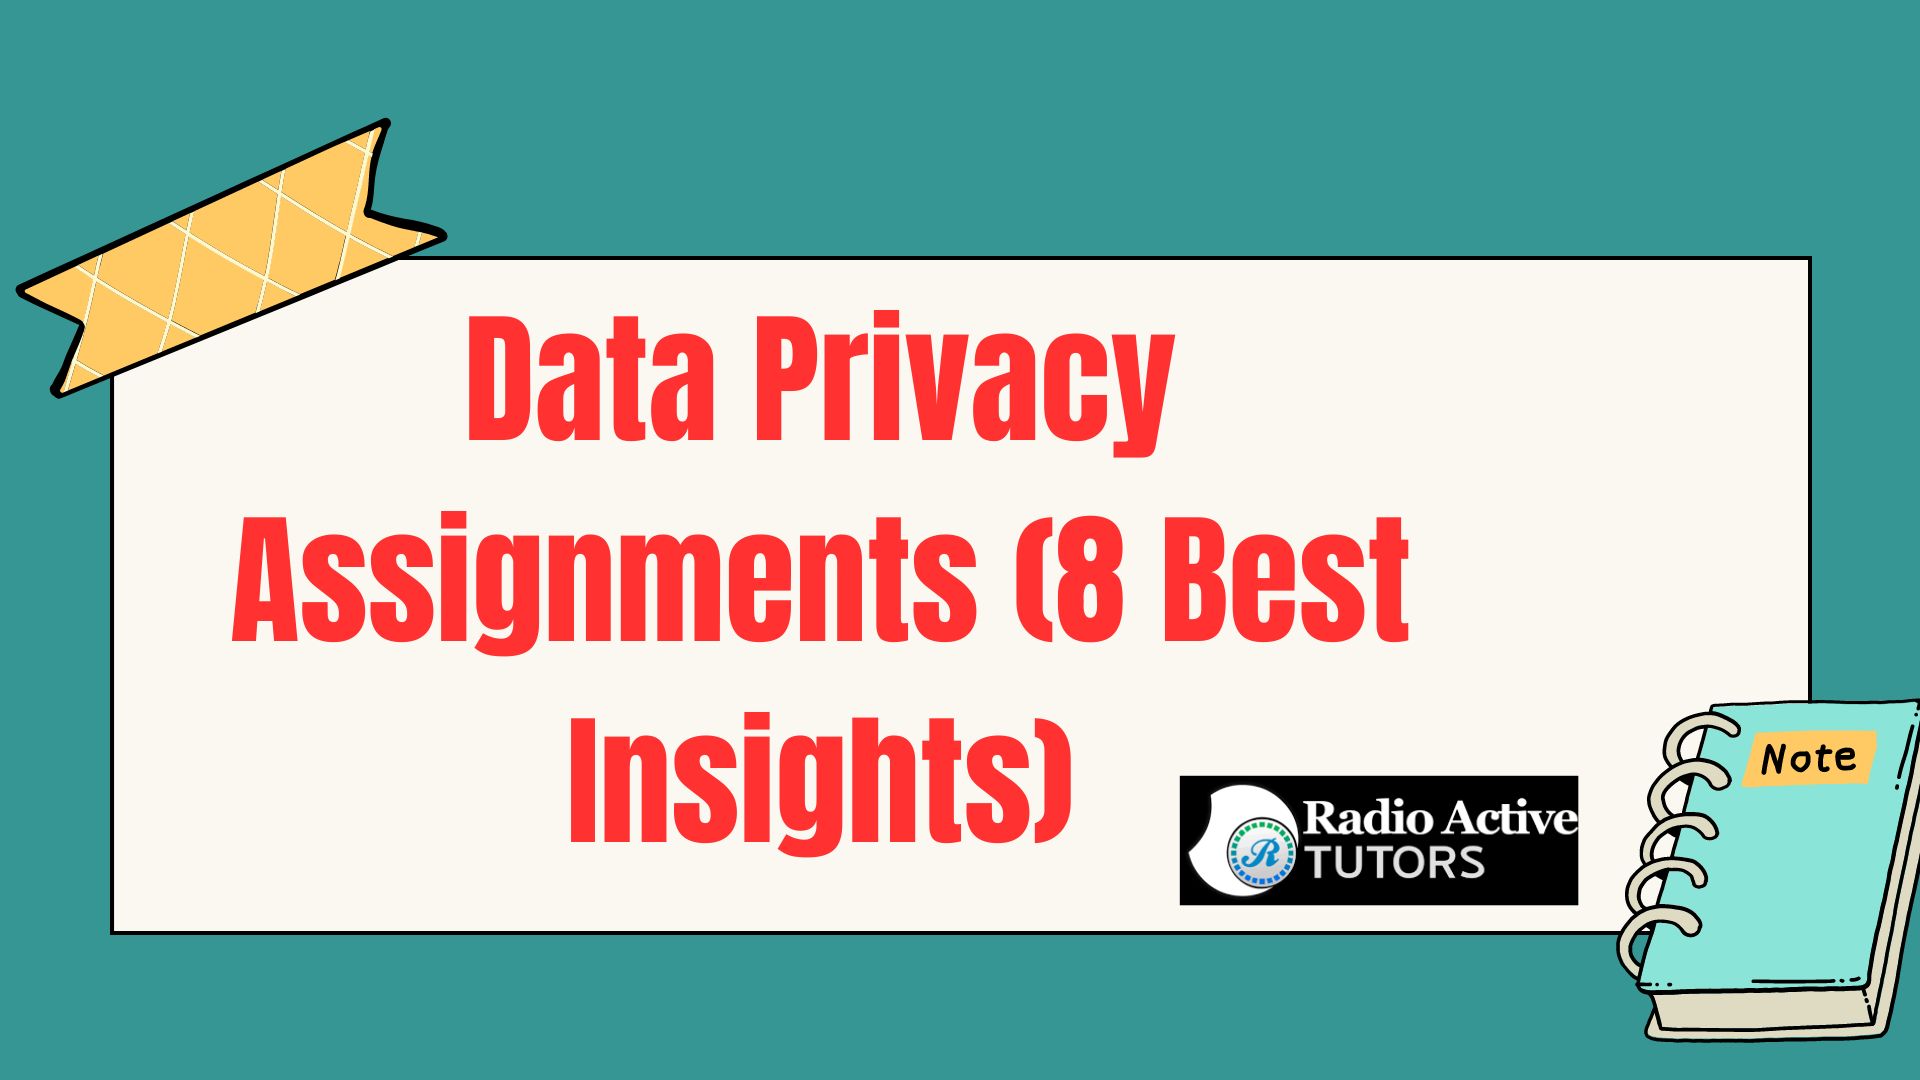 Data Privacy Assignments (8 Best Insights)